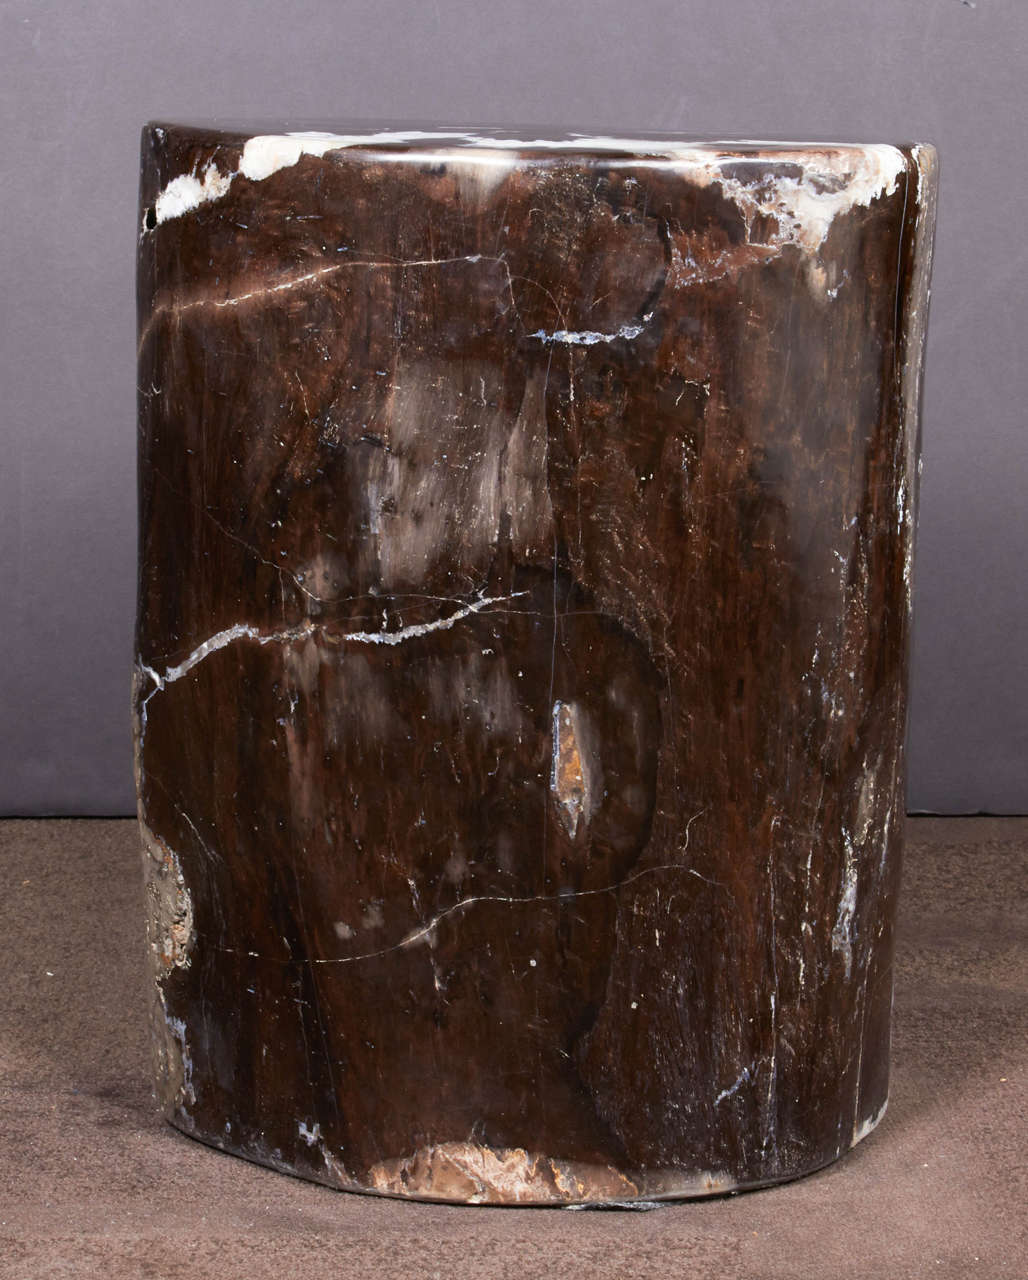 Organic Modern Outstanding Petrified Wood Side Table in Hues of Black Onyx